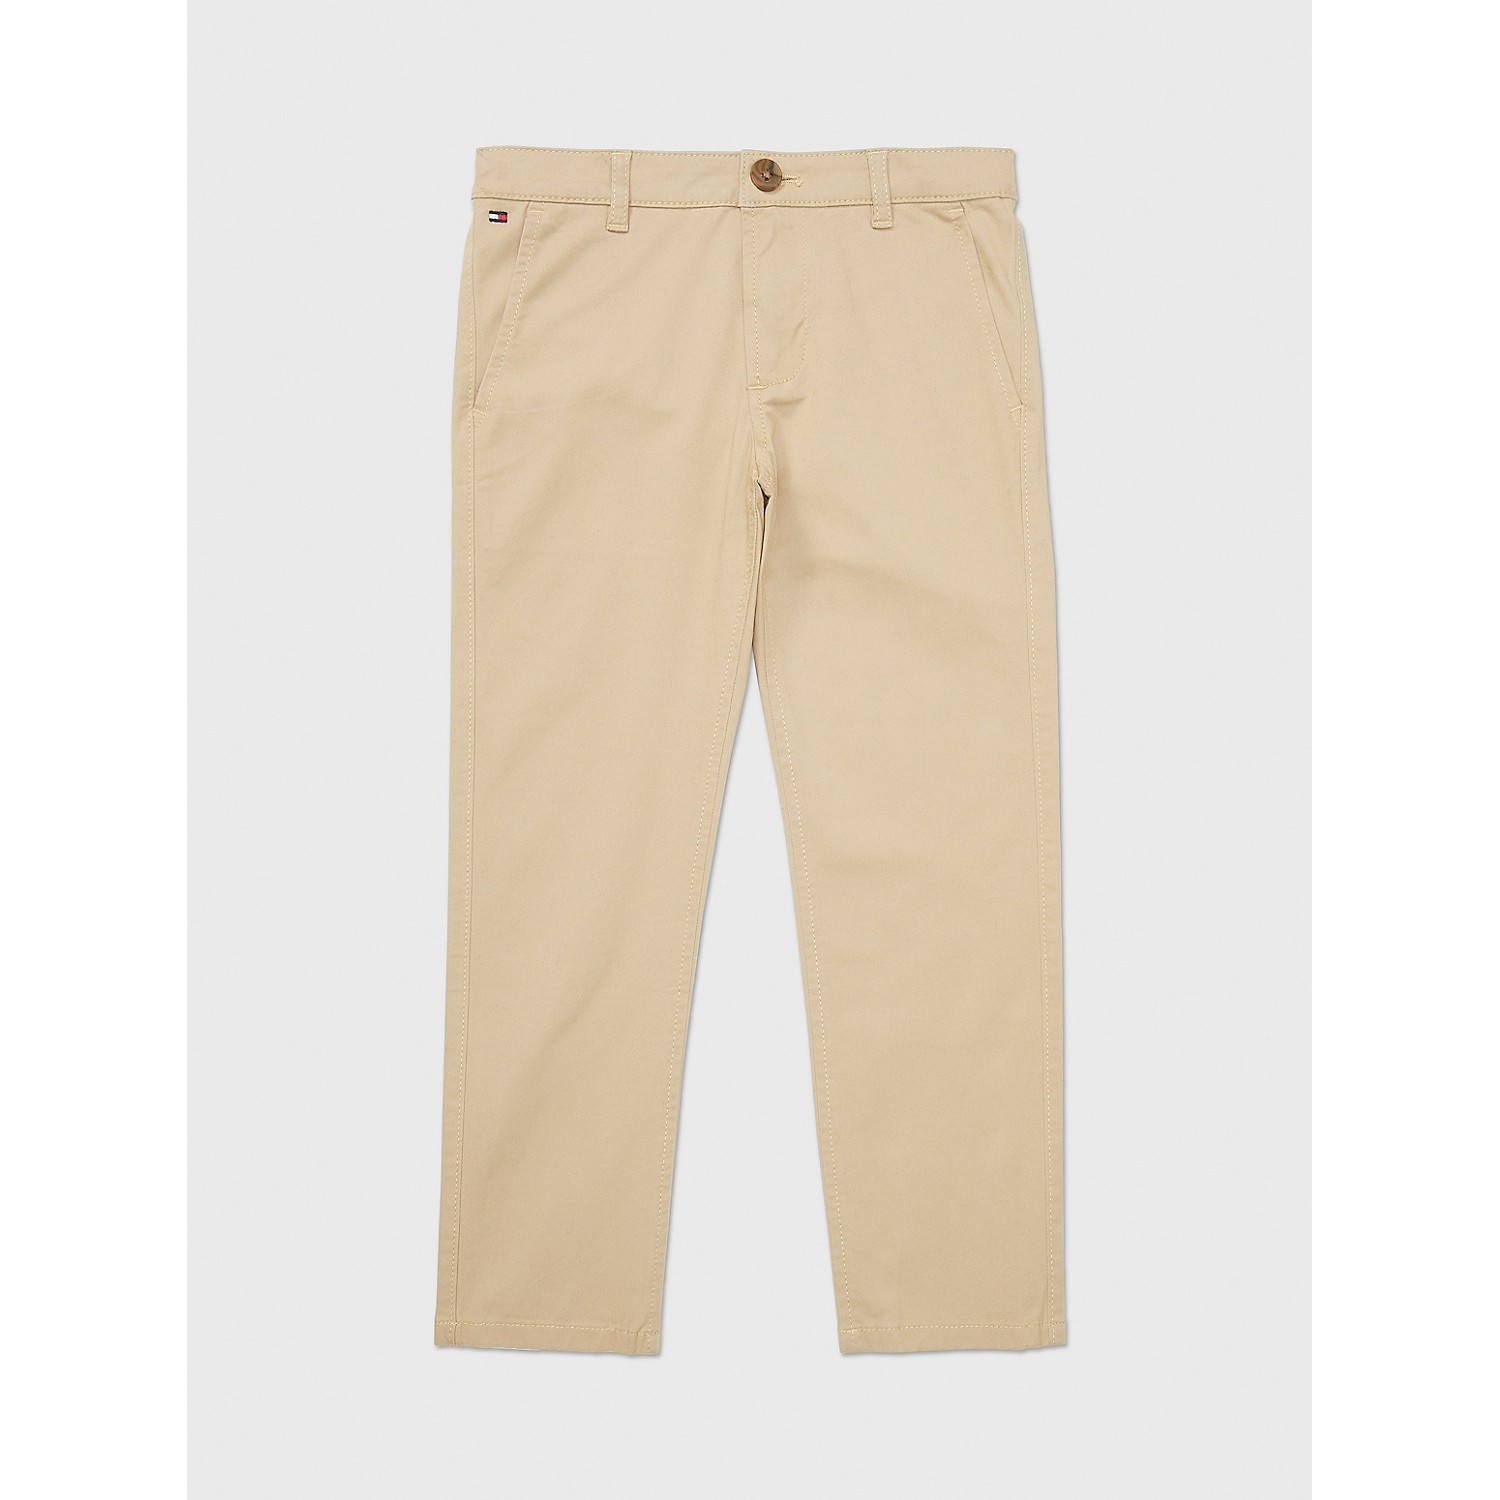 TOMMY HILFIGER Kids Solid Chino Pant